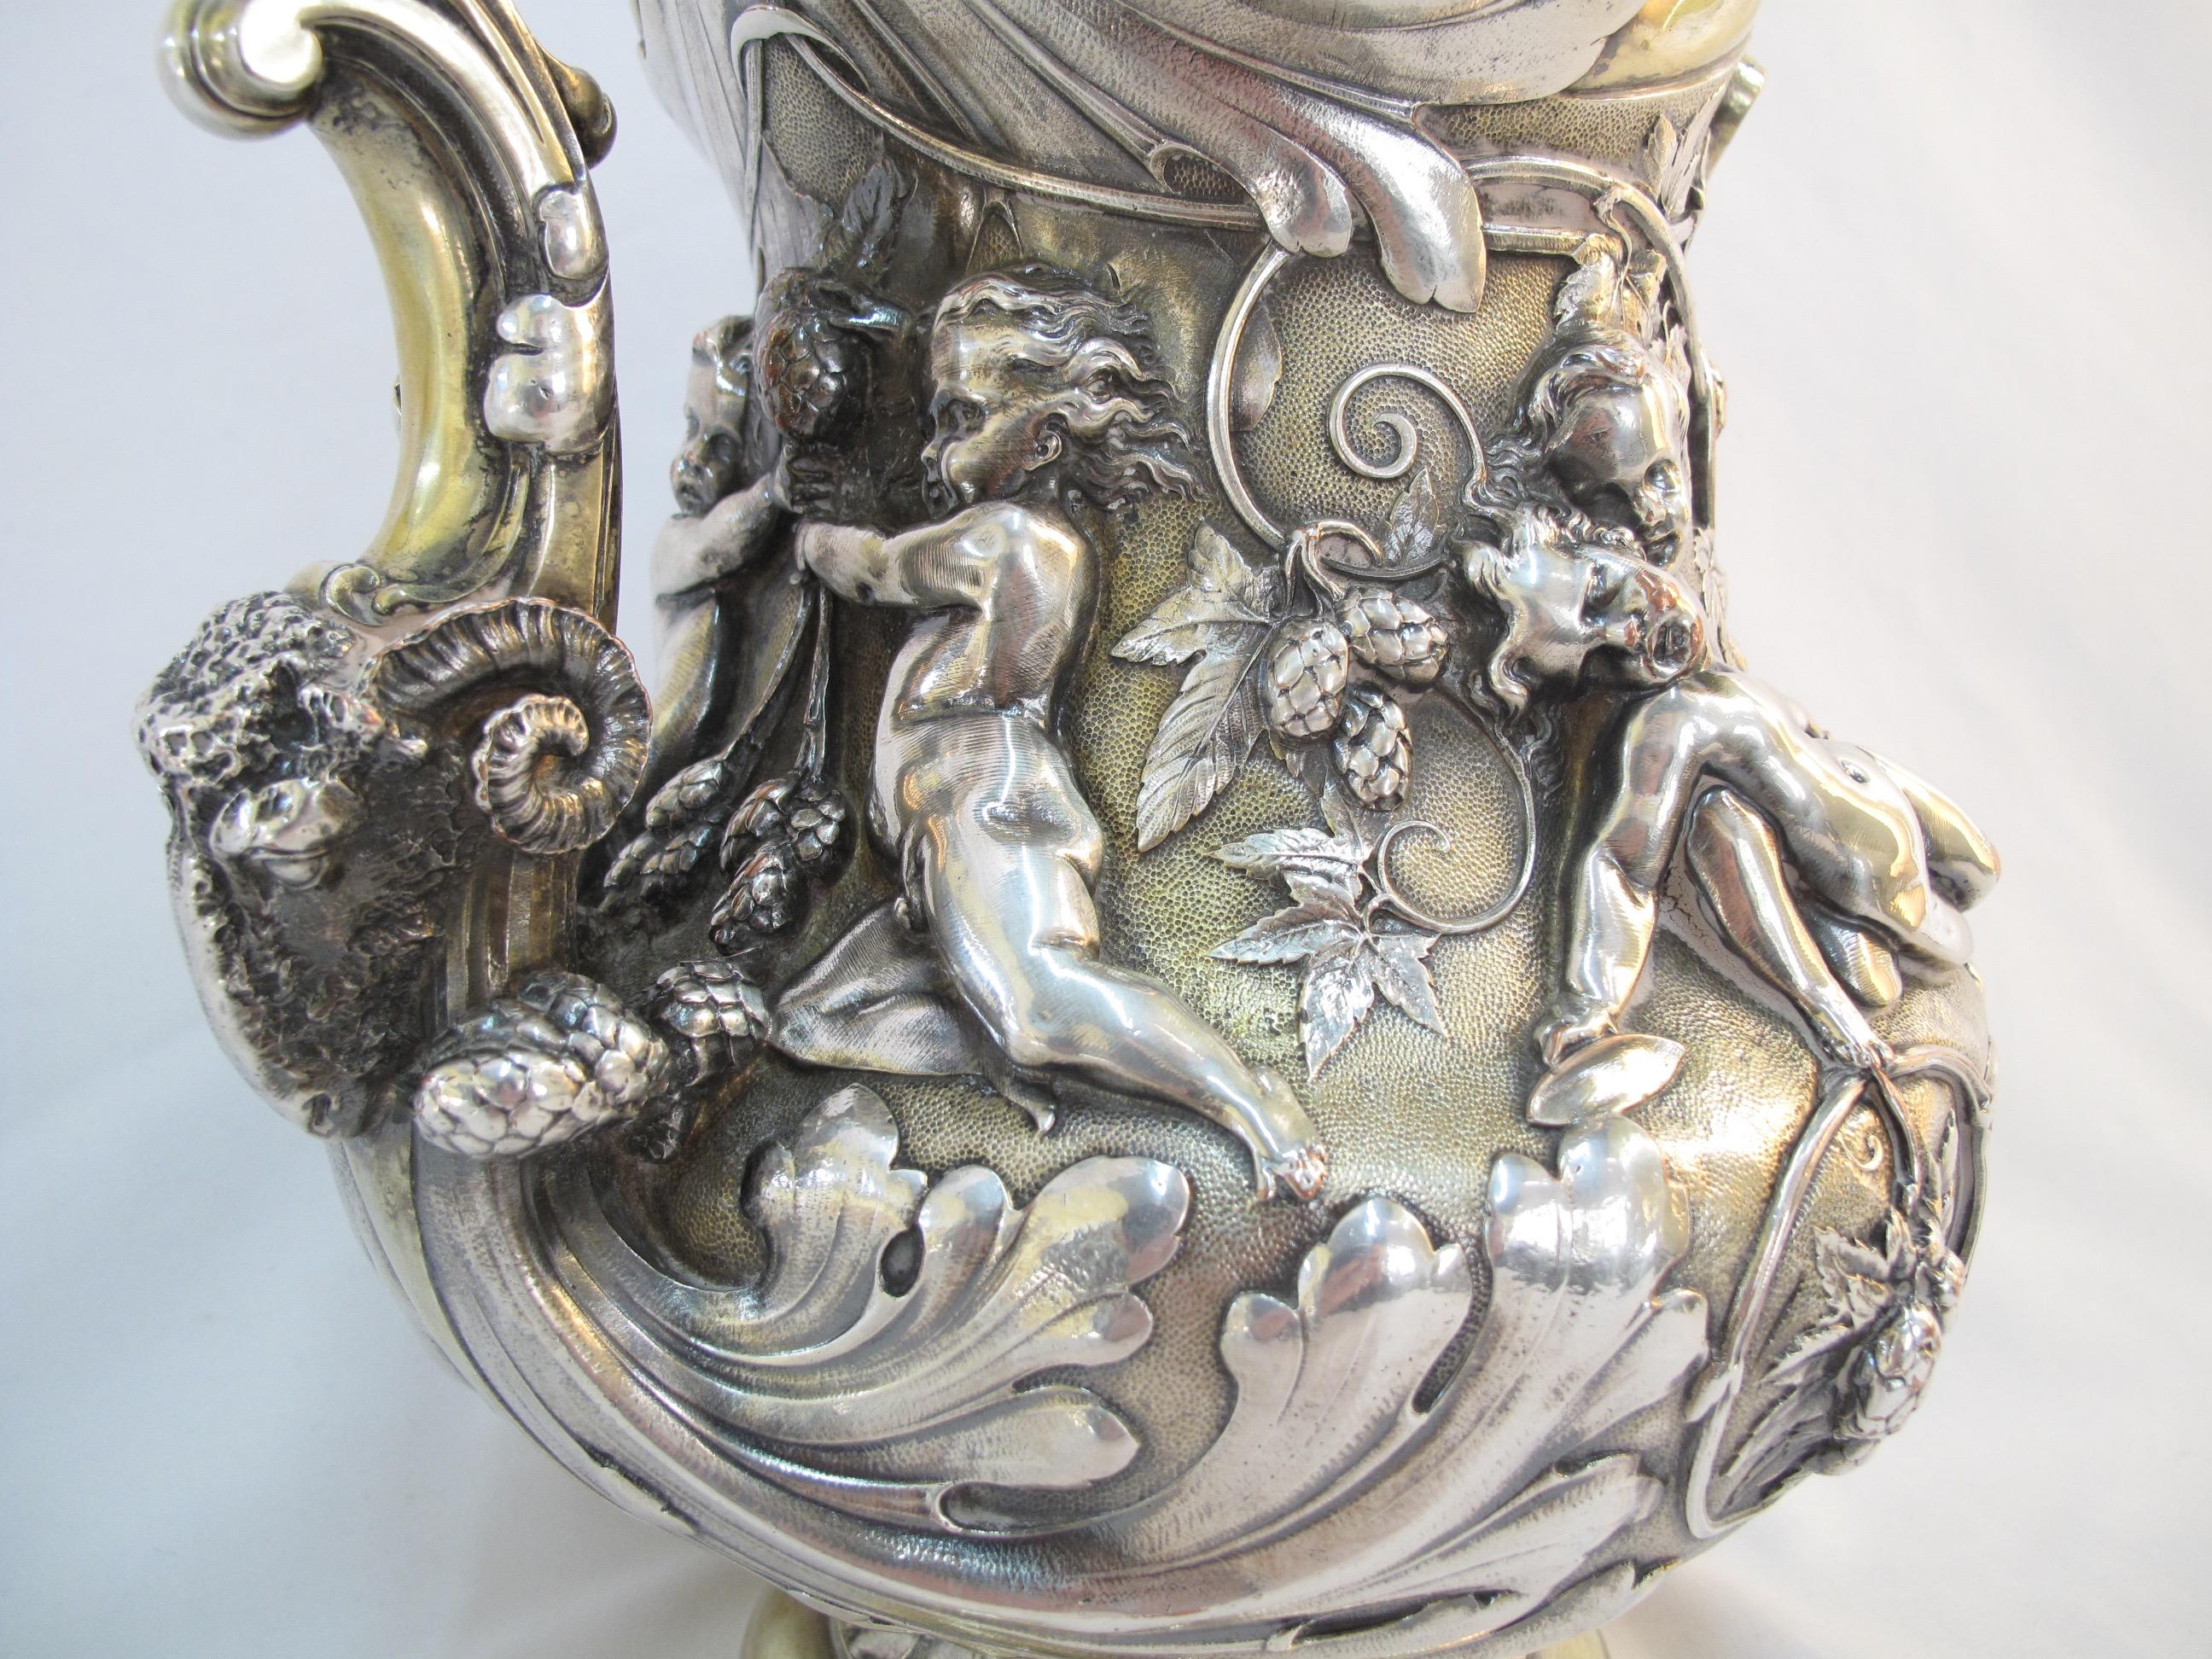 Large Ornate Putti Cavorting Among Hops Repousse Pitcher Elkington 19th Century For Sale 2